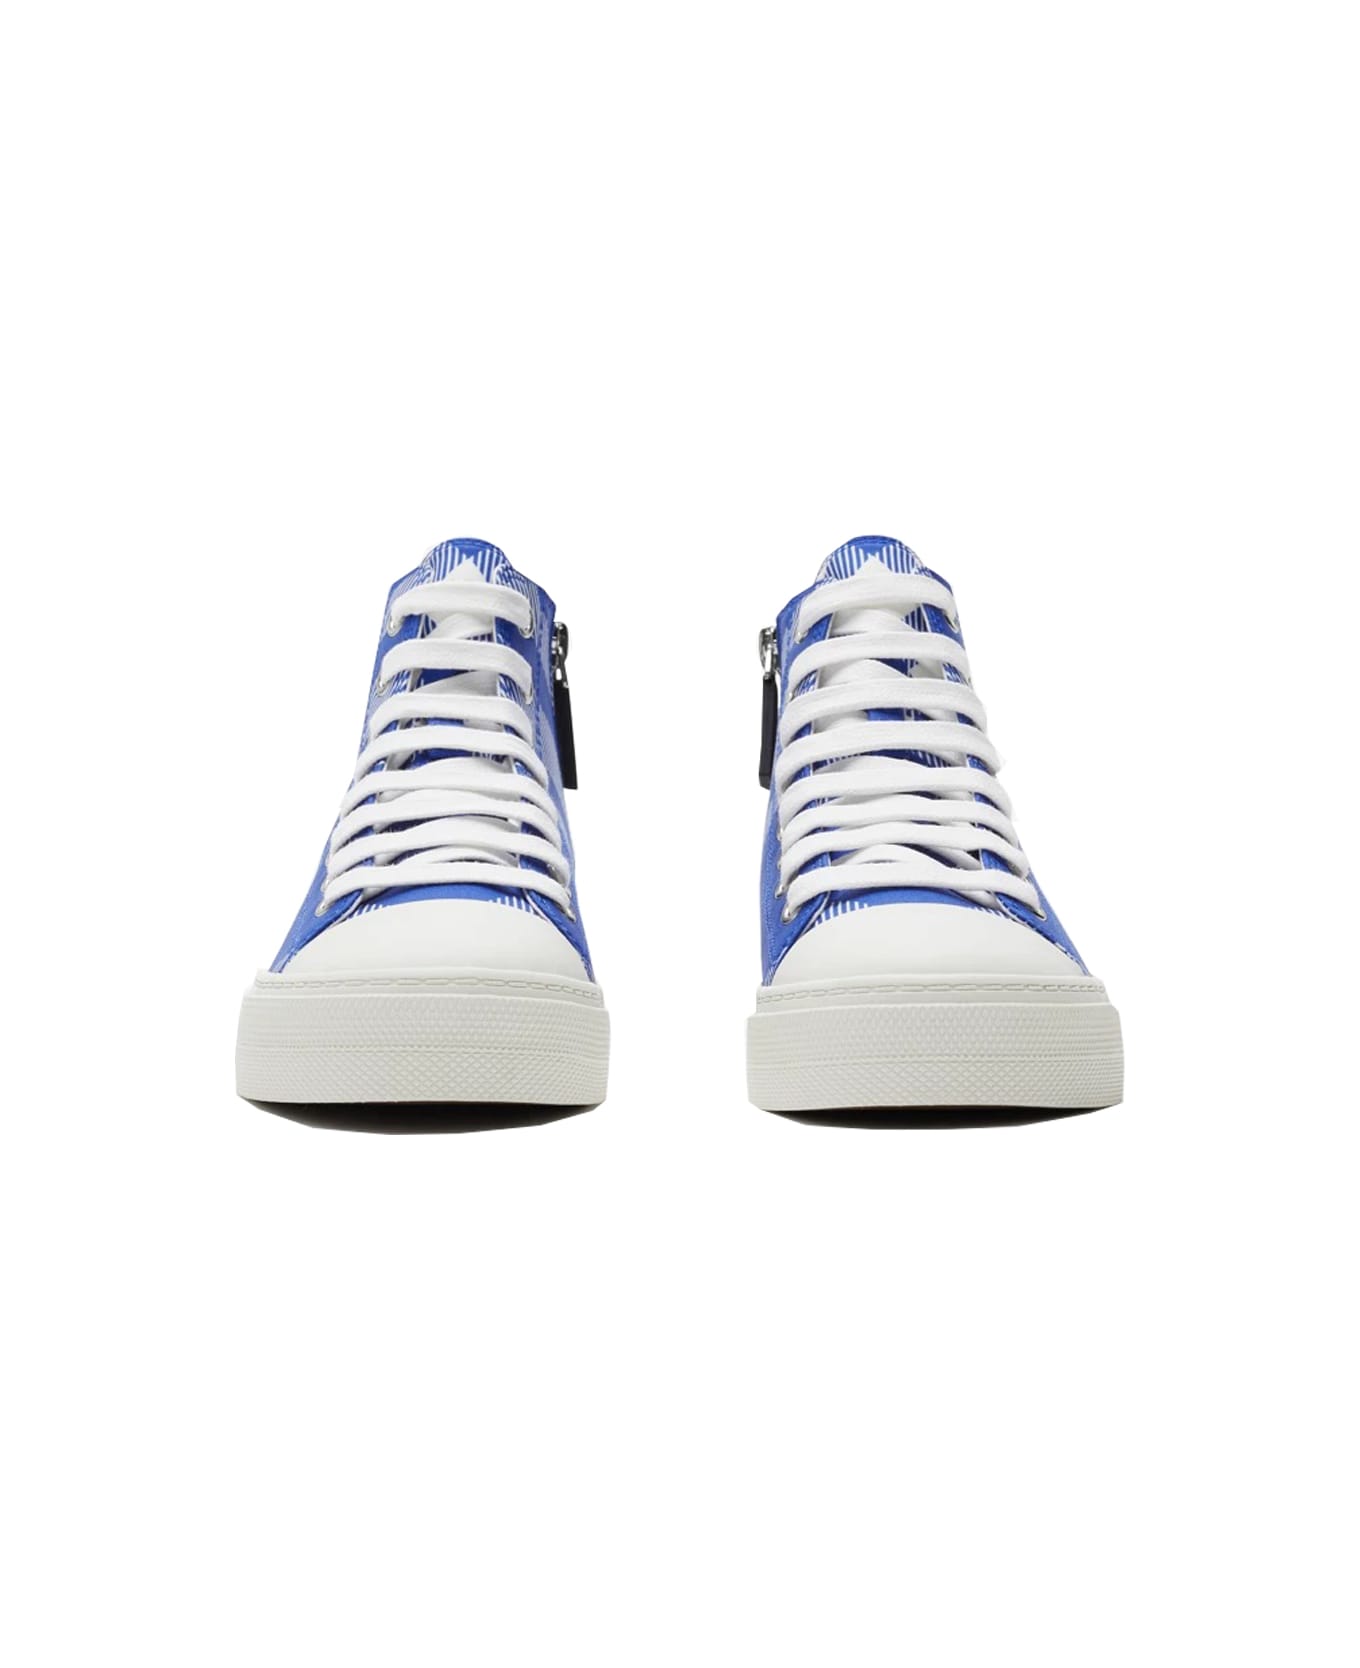 Burberry High Sneakers In Checked Cotton - Blue